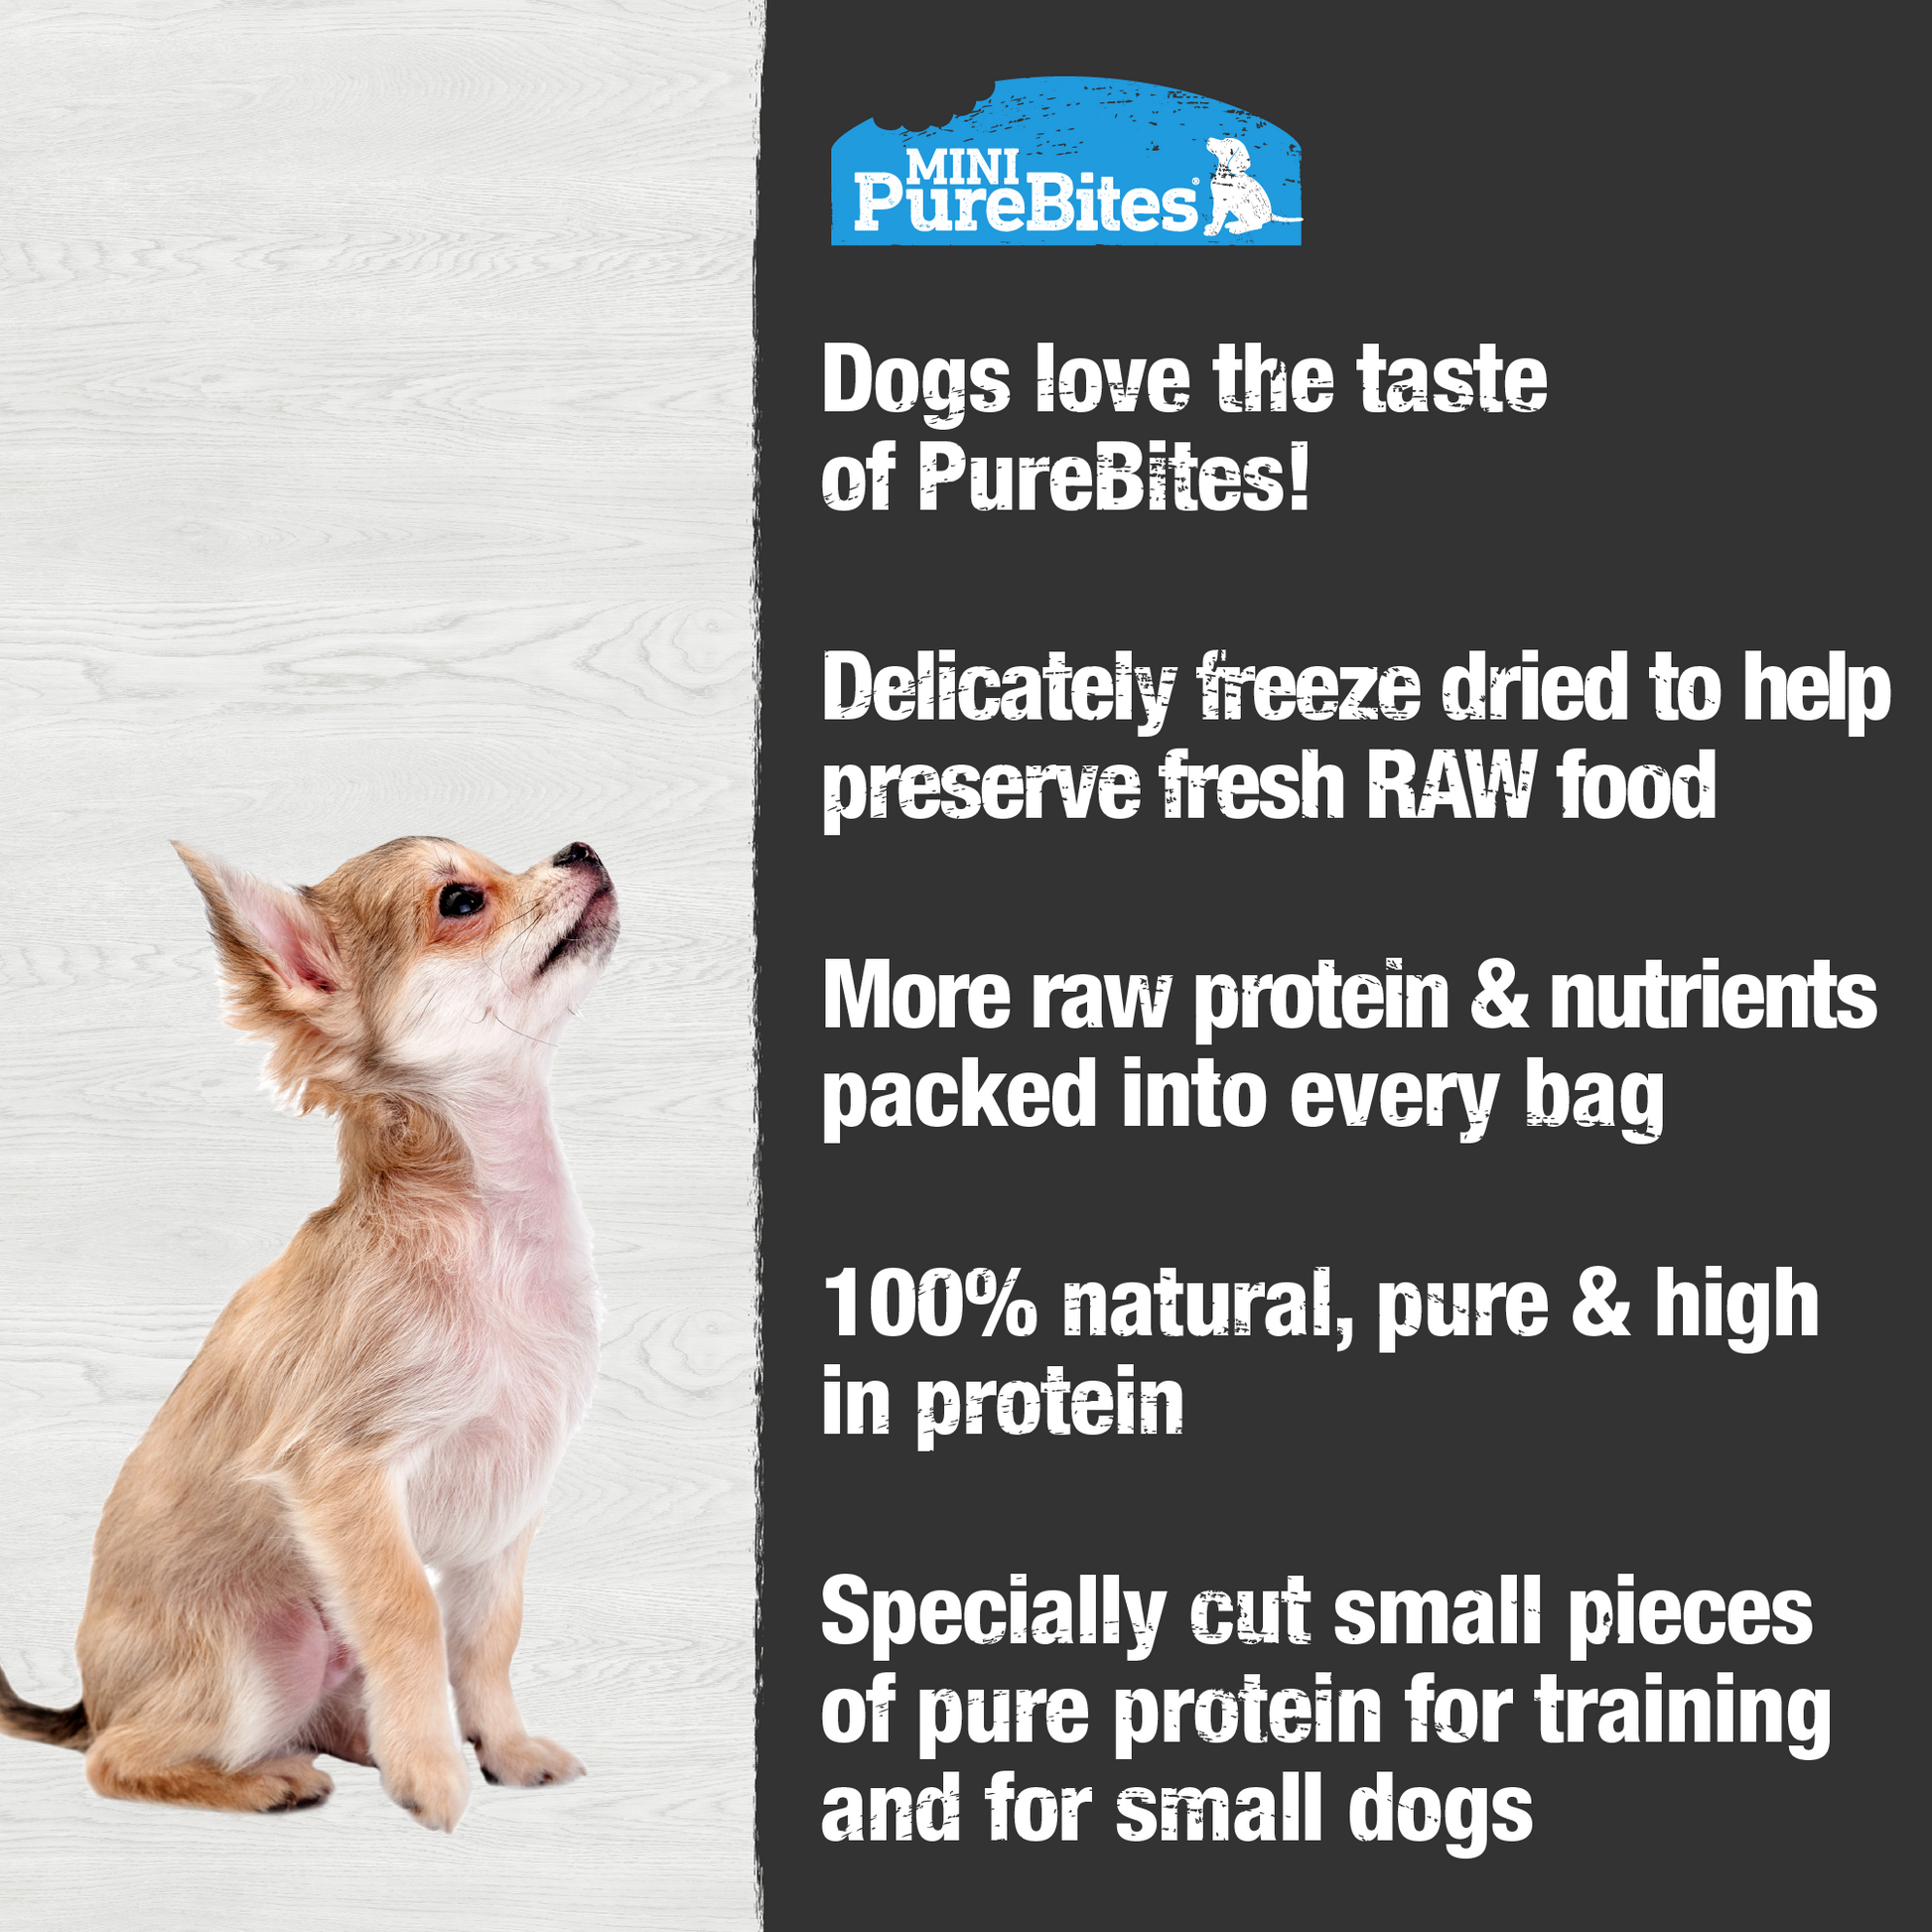 Made fresh & pure means more RAW protein and nutrients packed into every bag. Our lamb liver is freeze dried to help preserve its RAW taste, and nutrition, and mirror a dog’s ancestral diet